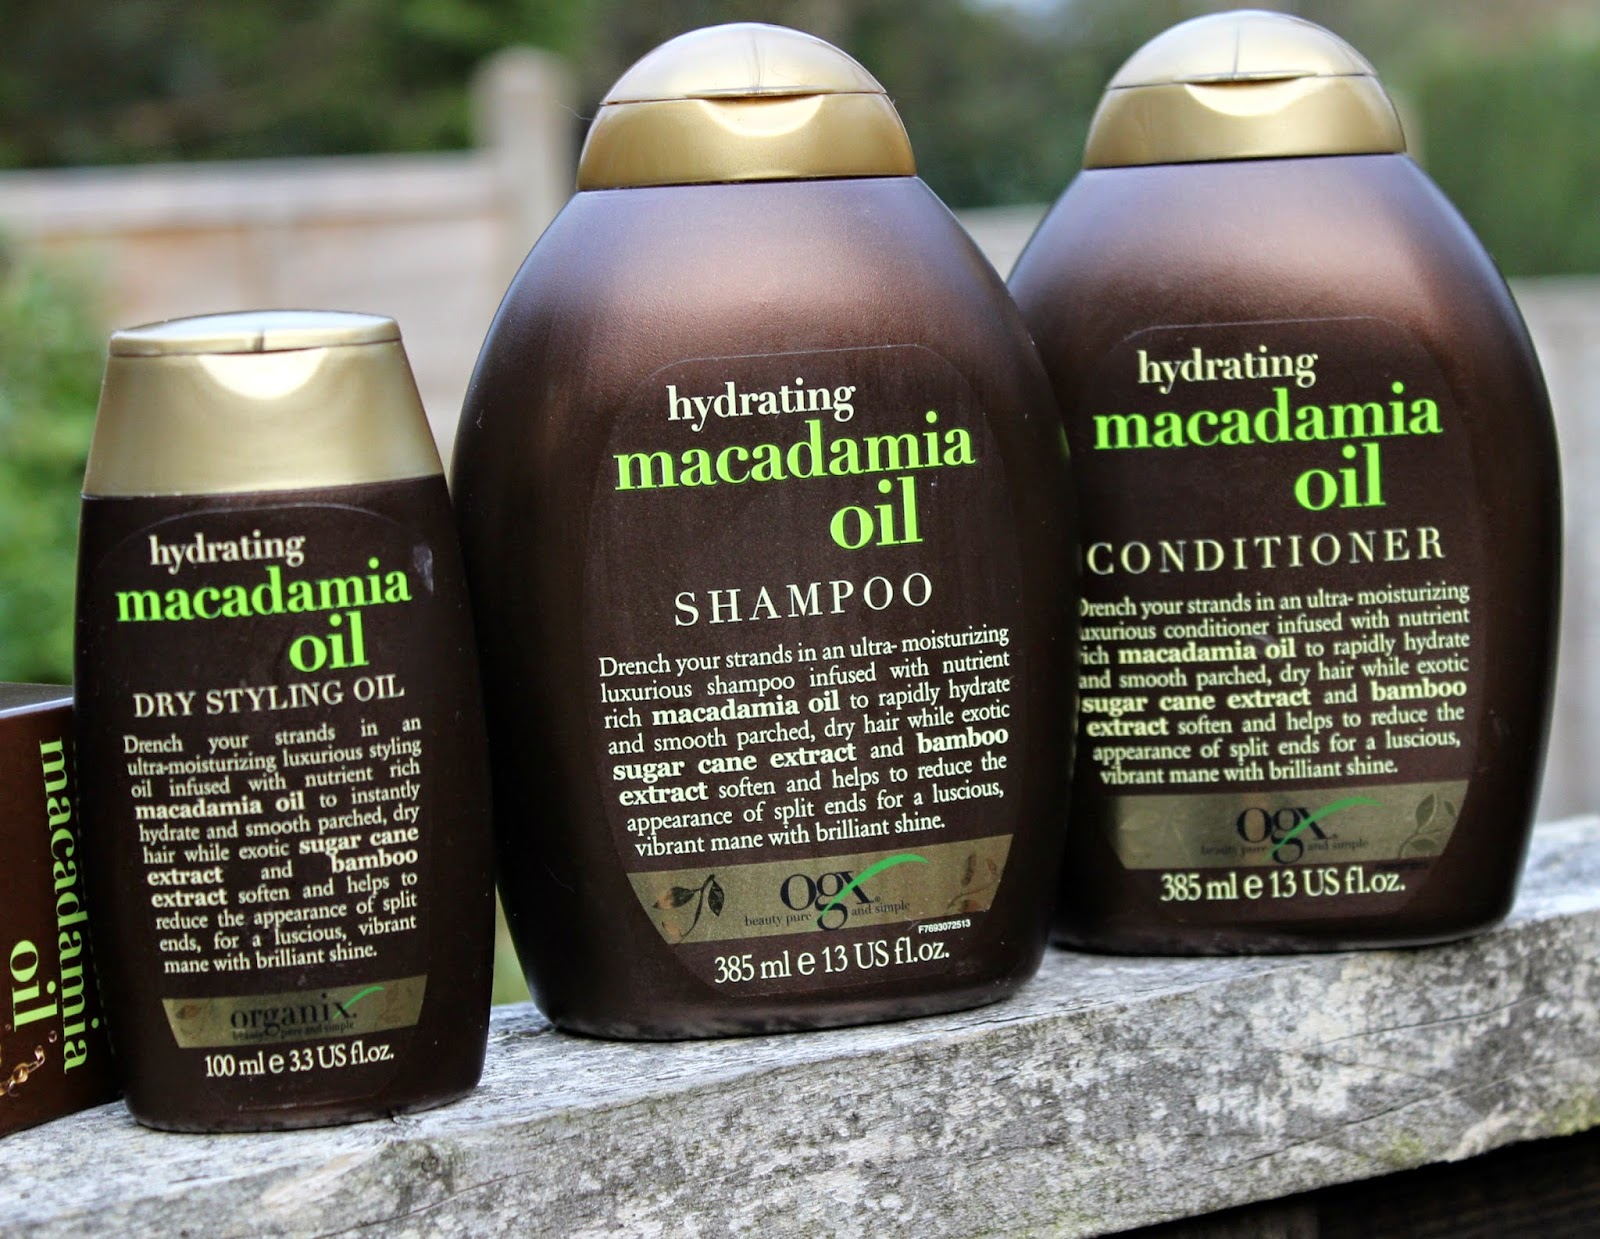 A picure of the OGX Hydrating Macadamia Oil Shampoo, Conditioner and Dry Styling Oil 